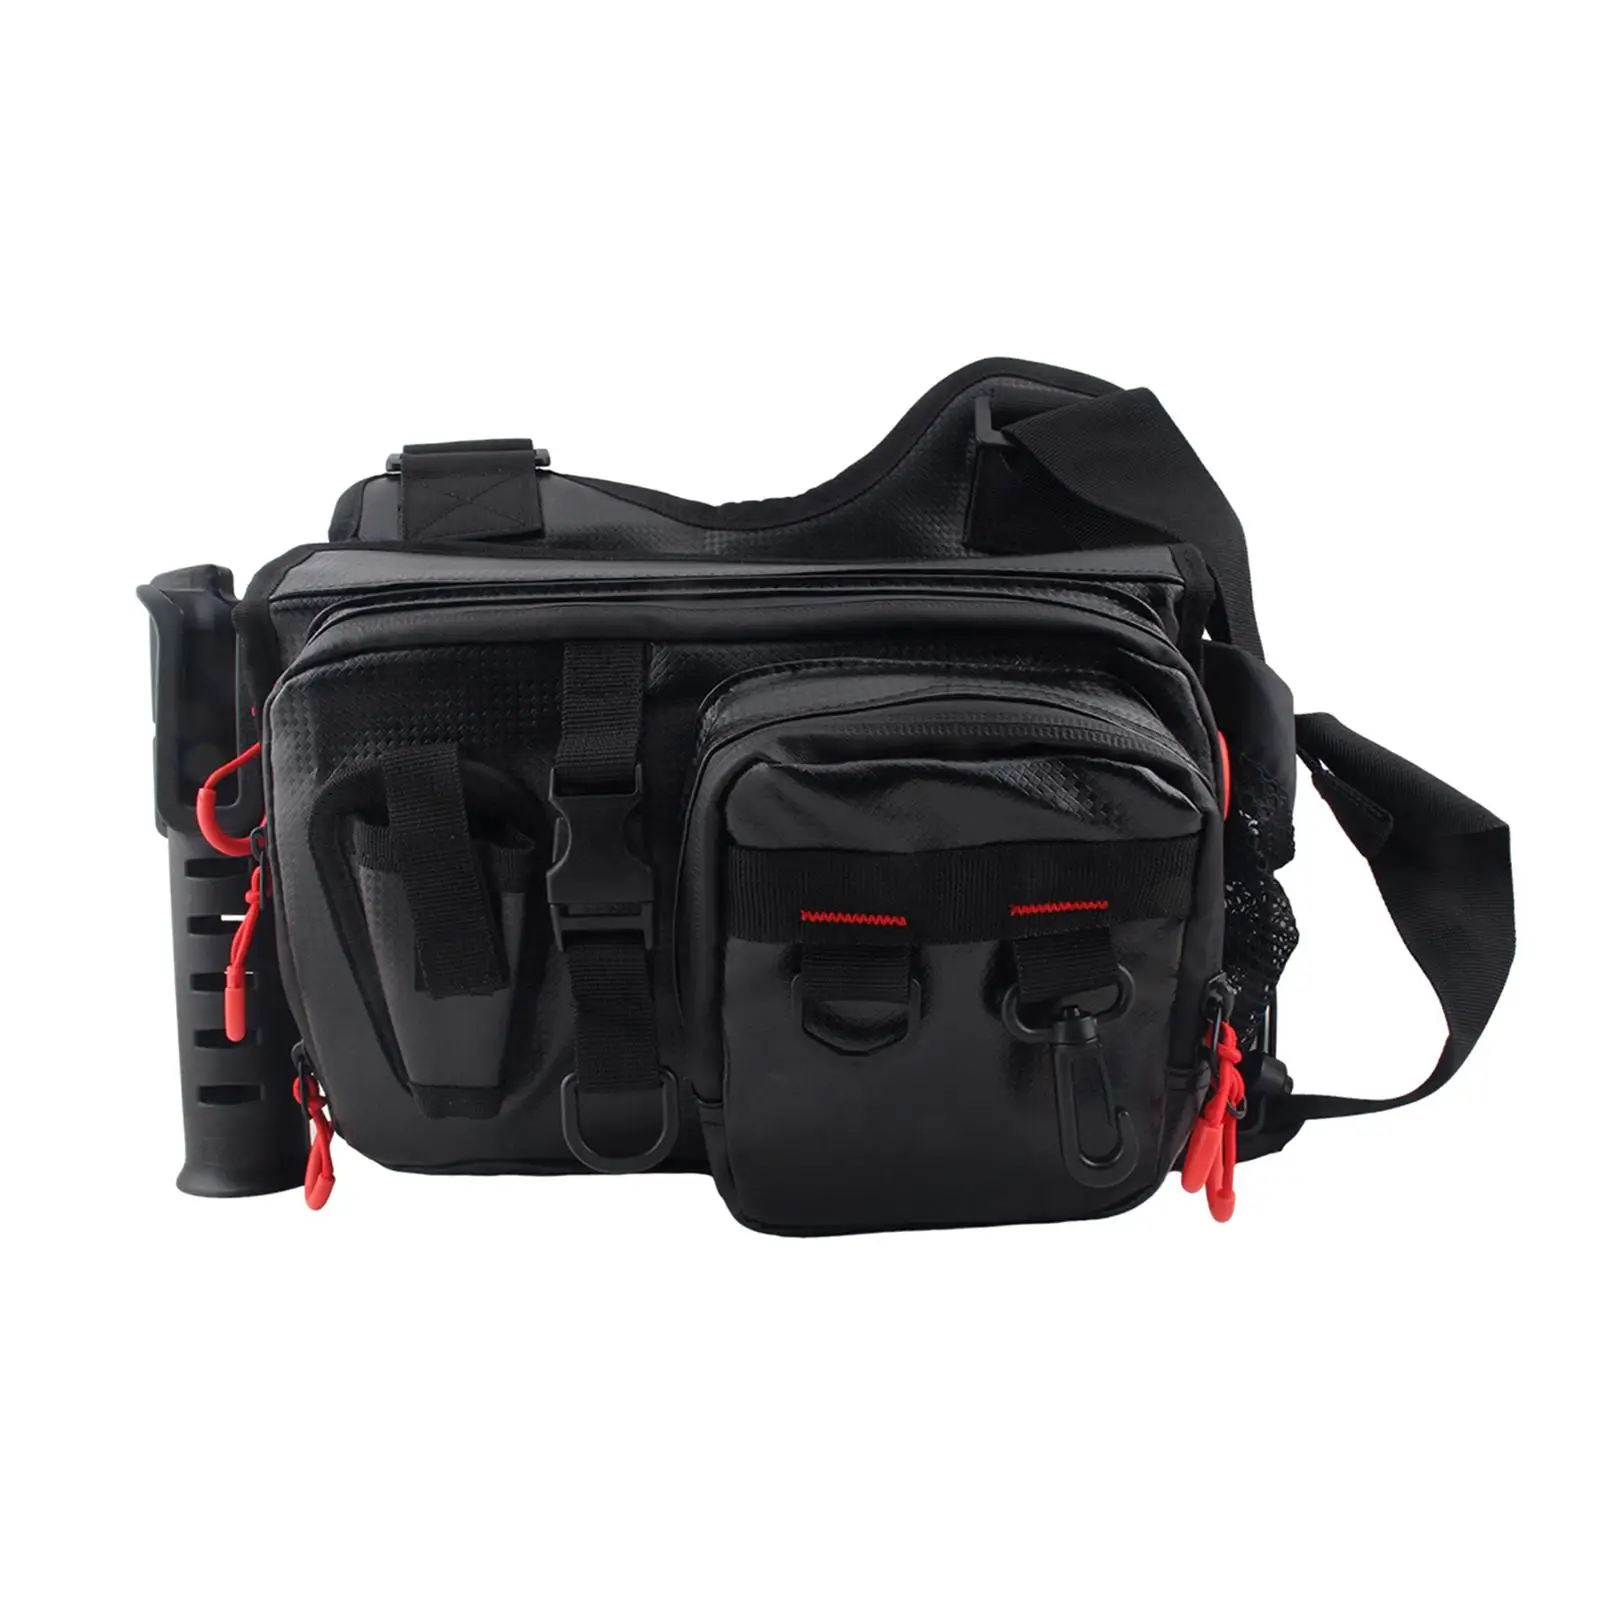 Lure Bag Resistant Waterproof Fashion Accs Fishing Bag Fanny Pack Lure Fishing Bag for Hiking Fishing Camping Outdoor Adult